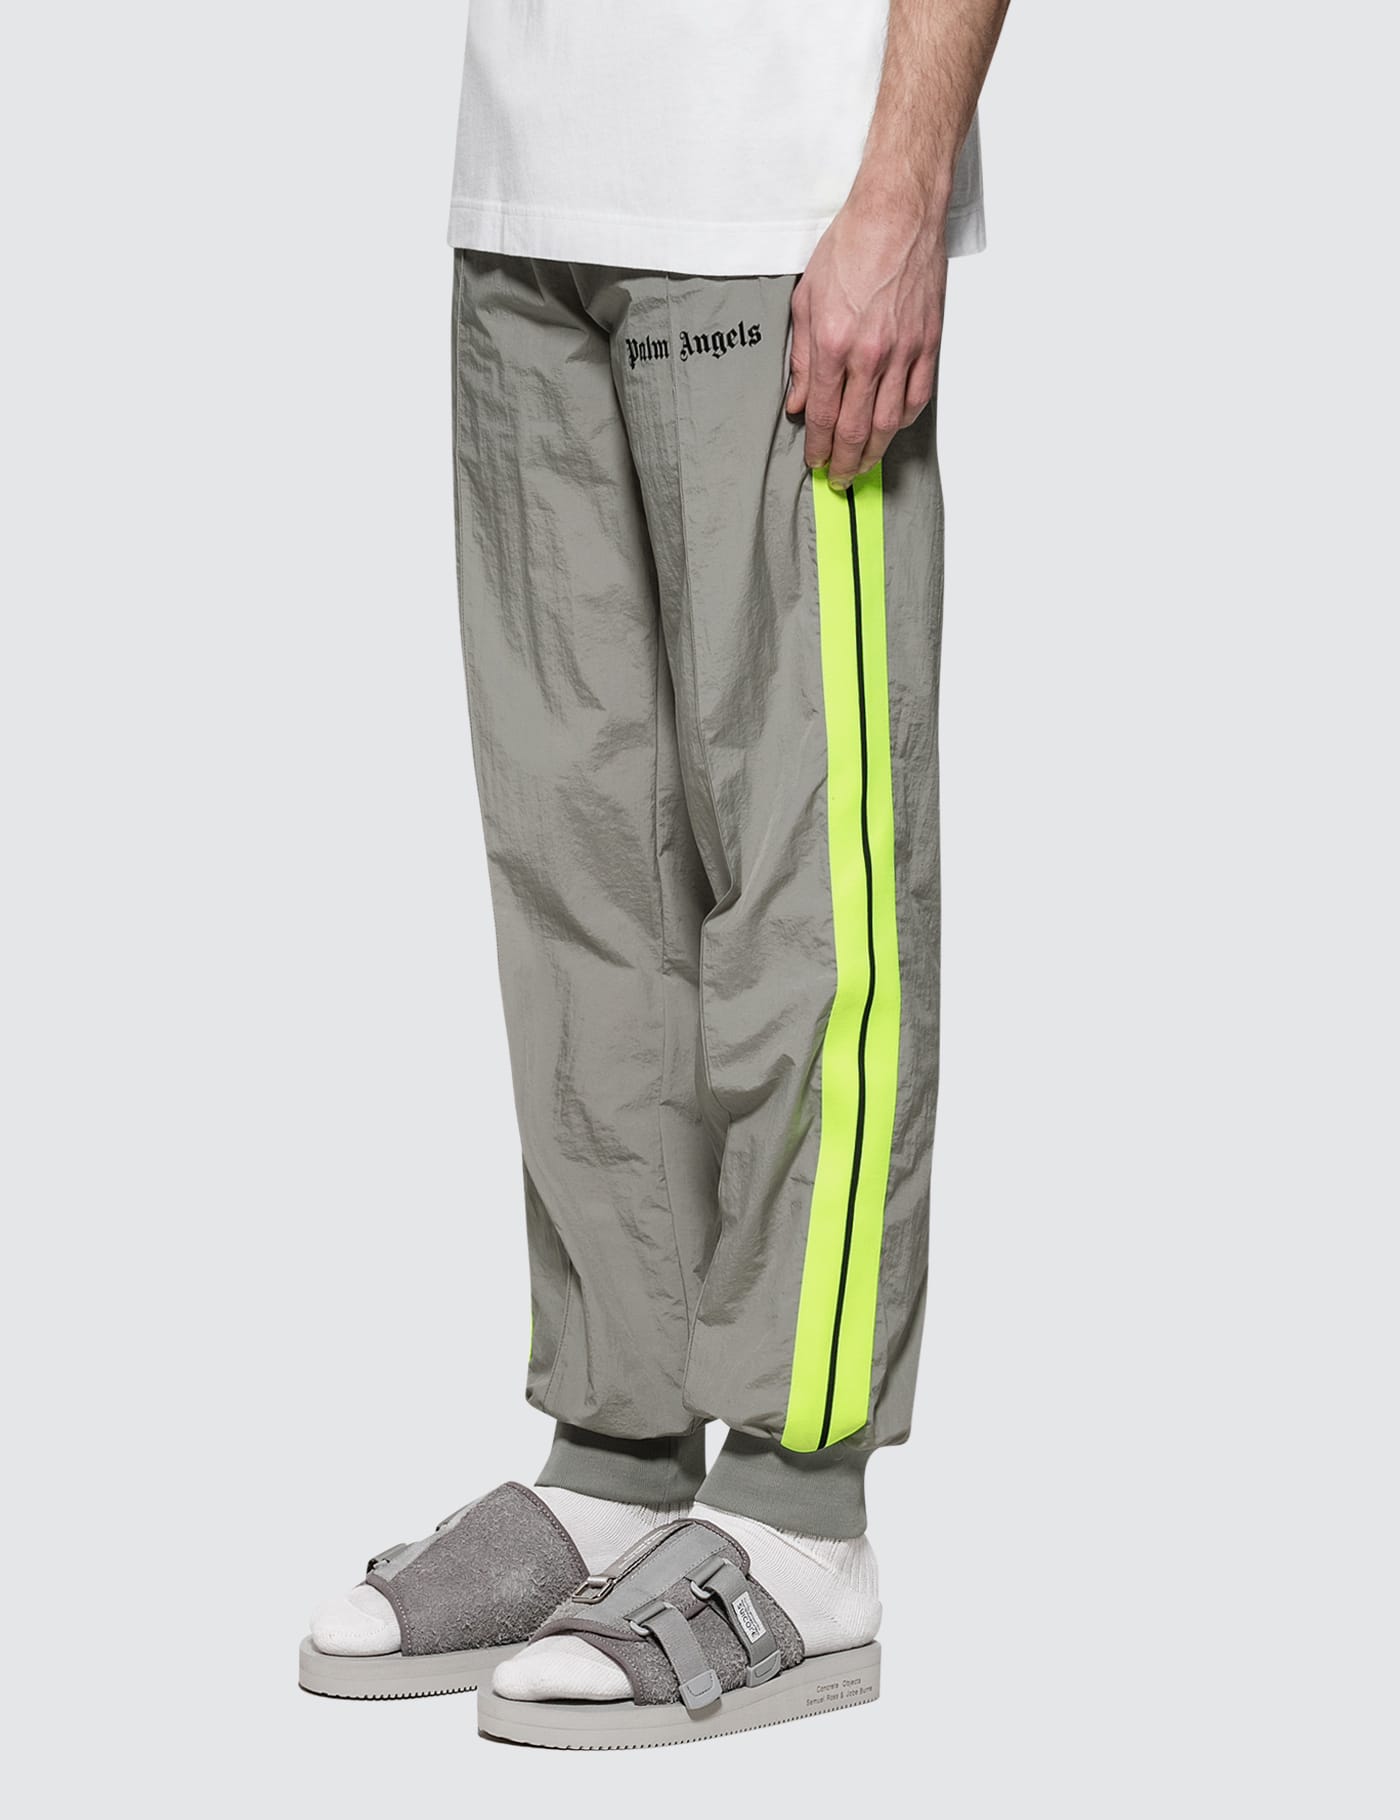 Palm Angels - Loose Fit Track Pants | HBX - Globally Curated 